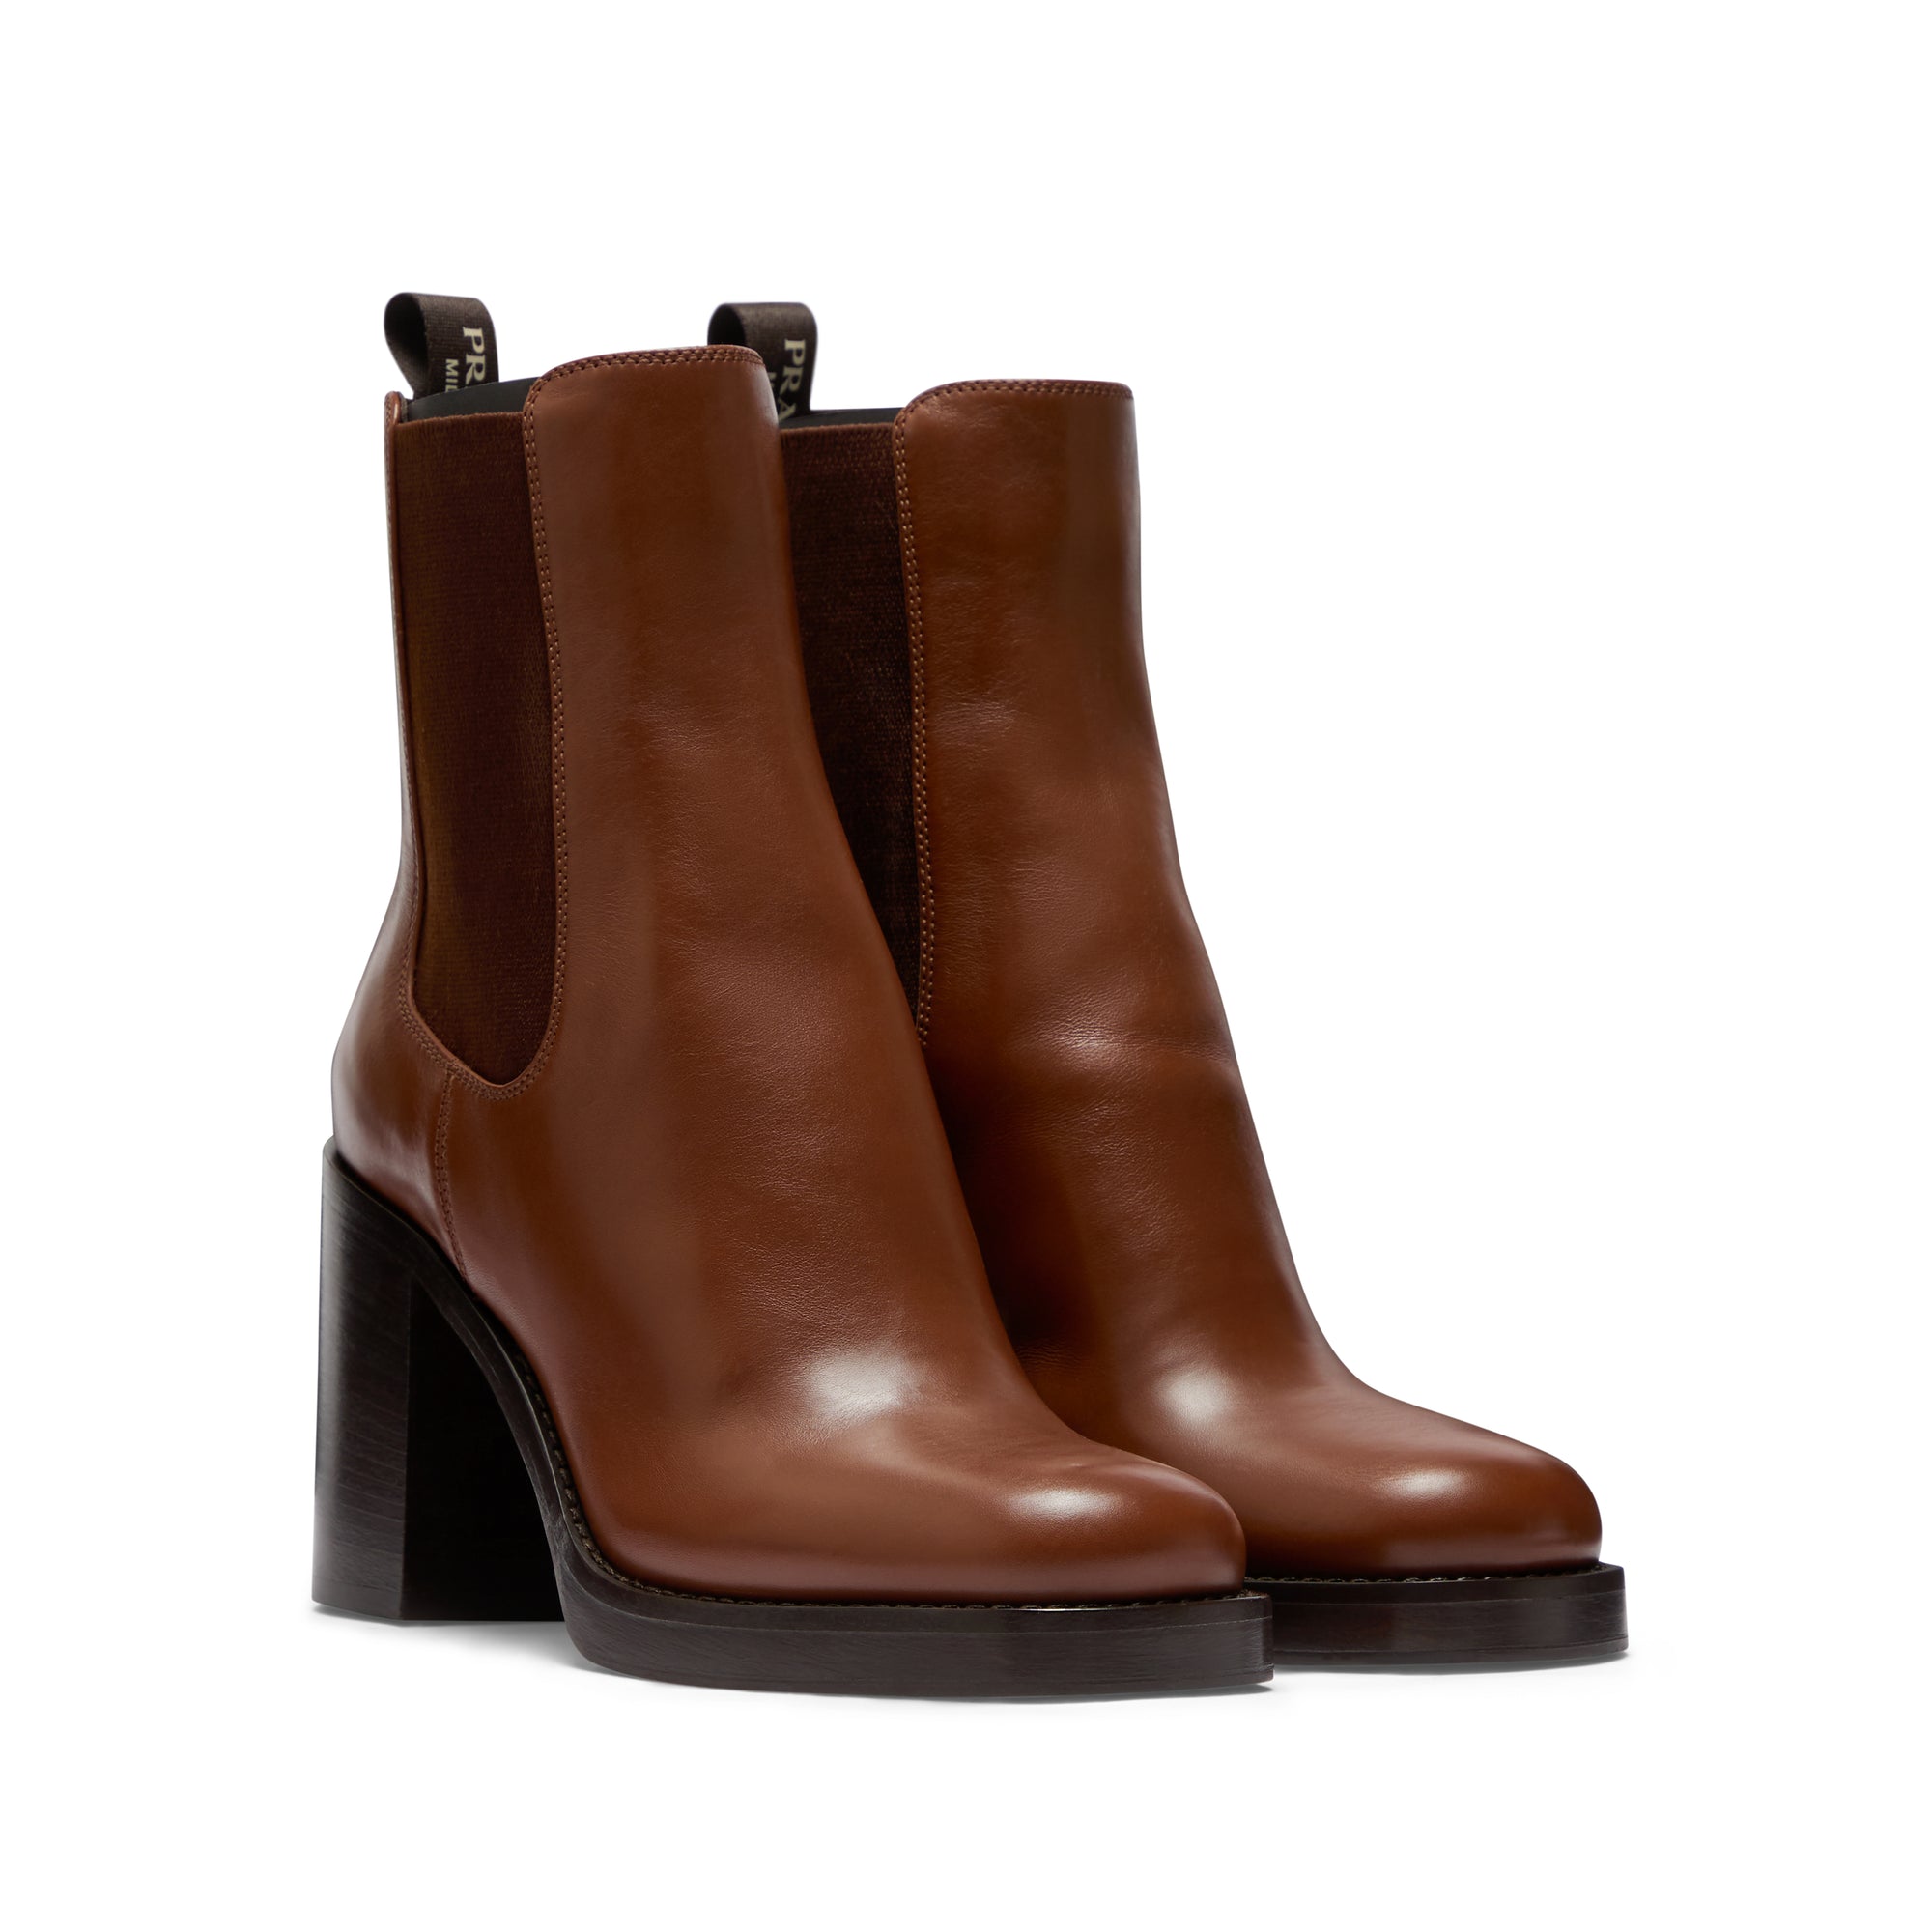 Prada - Women’s Leather Ankle Boots - (Cognac) view 2